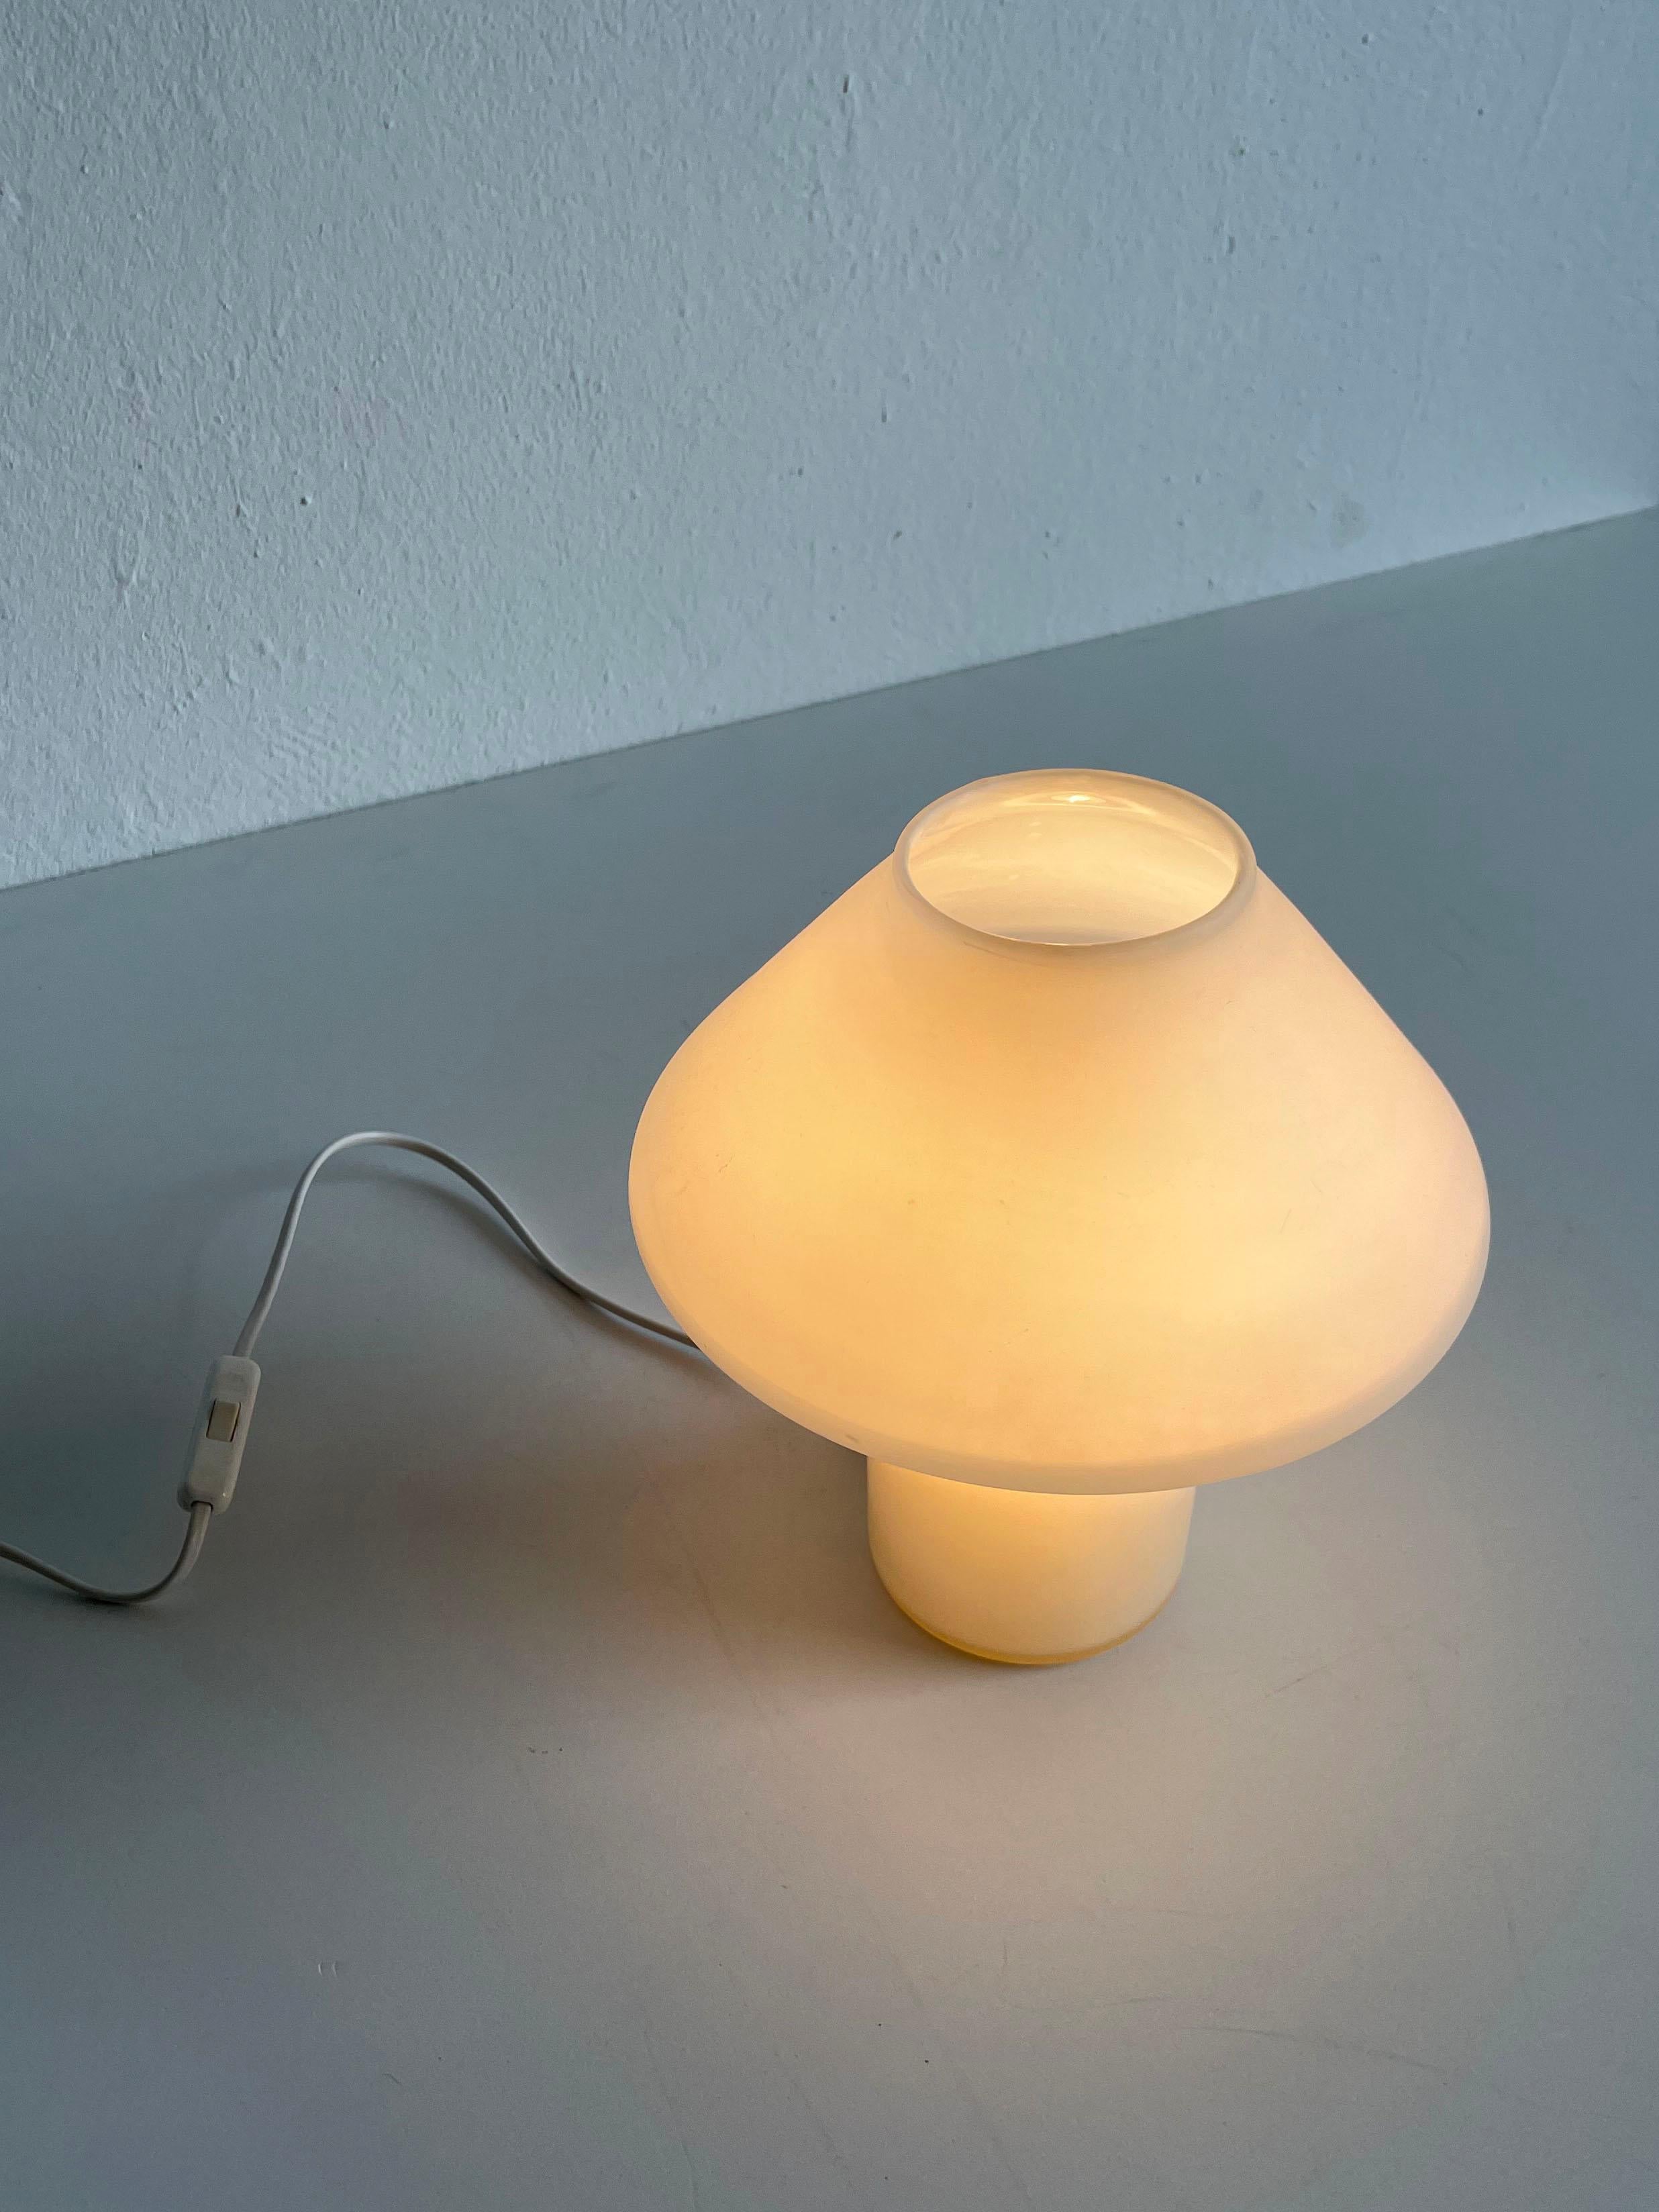 1970s white satin glass mushroom table lamp designed by the Dutch lighting manufacturer Hala Zeist.
The lamp has a mushroom-shape top design with a cylindrical base.

The lamp is unmarked.

It has one E14 lamp socket and an European 2-pin